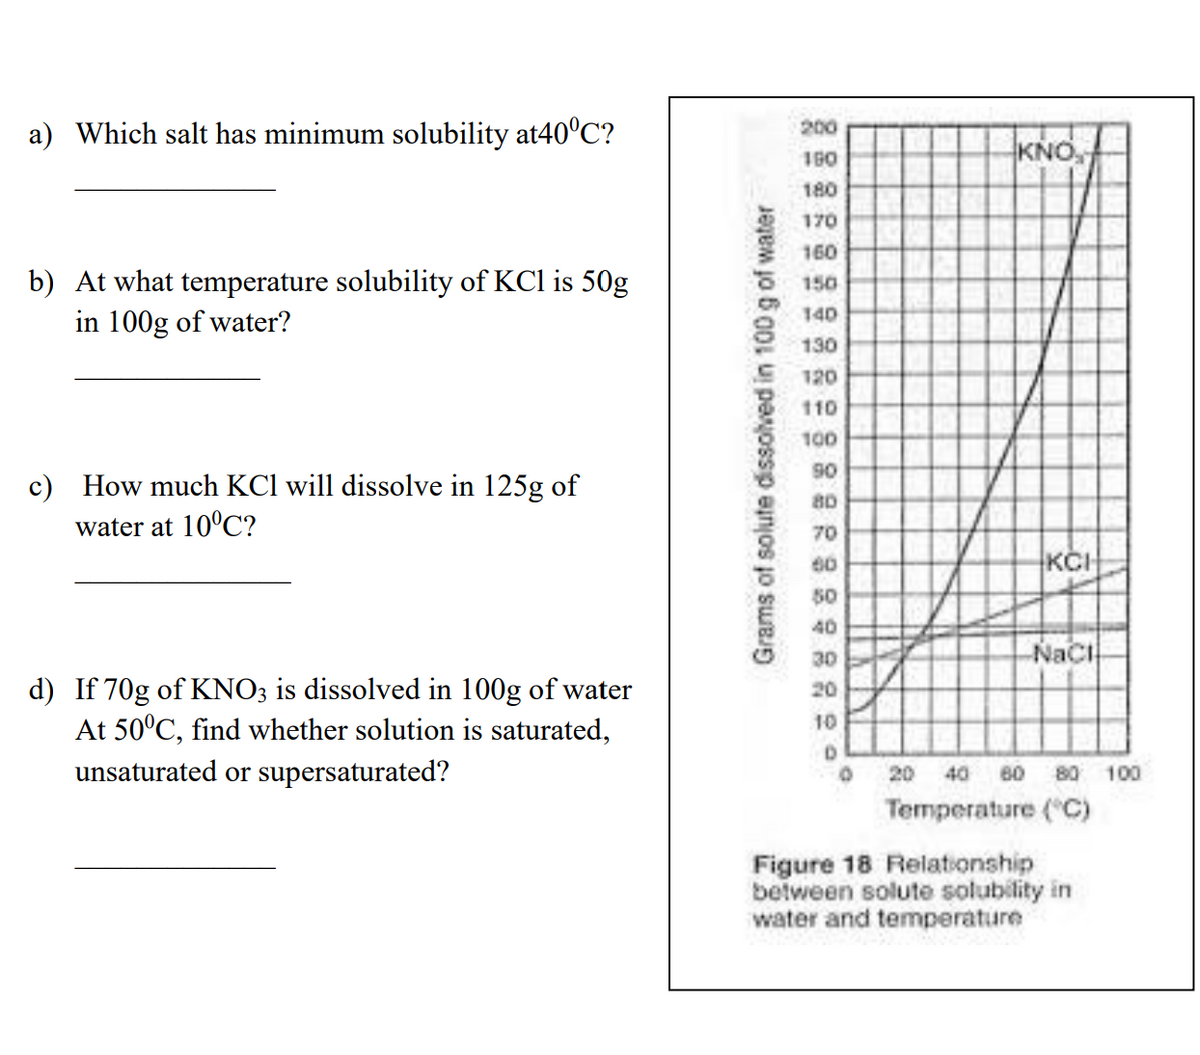 a) Which salt has minimum solubility at40°C?
200
160
KNO,
180
170
160
b) At what temperature solubility of KCl is 50g
in 100g of water?
150
140
130
120
110
100
90
c) How much KCl will dissolve in 125g of
80
water at 10°C?
70
60
KCI
50
40
Naci
30
d) If 70g of KNO; is dissolved in 100g of water
At 50°C, find whether solution is saturated,
unsaturated or supersaturated?
20
10
20 40 80 80
100
Temperature ("C)
Figure 18 Relationship
between solute solubility in
water and temperature
Grams of solute dissolved in 100 g of water
